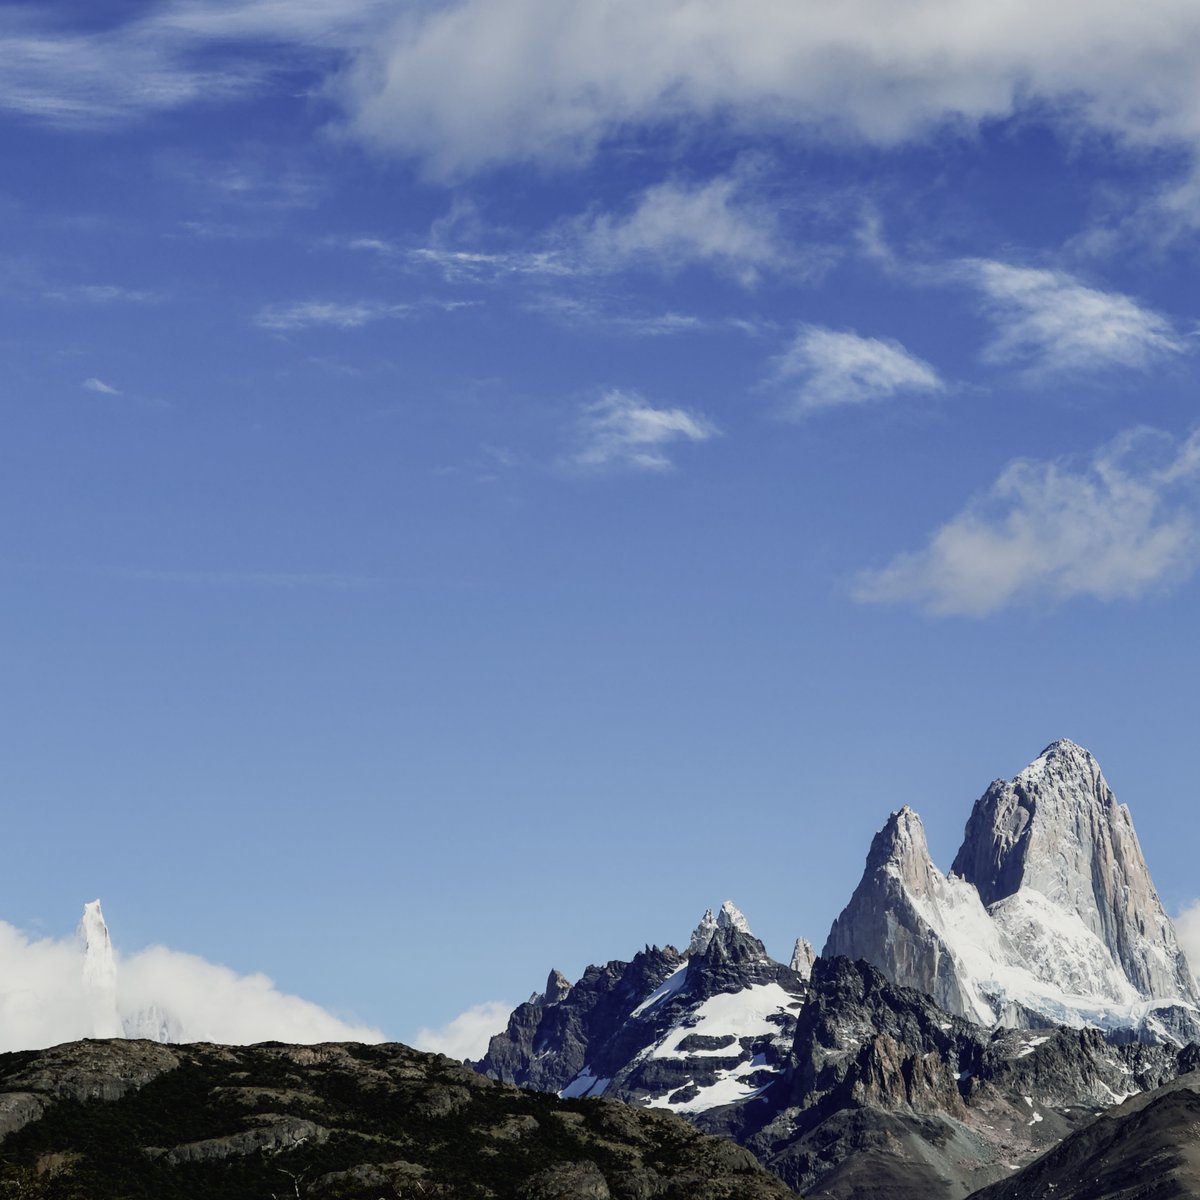 Fitz Roy and Cerro Torre rising into the heavens. 9000 ft of prominence from where I took this photo. So they look HUGE. Hear soundscapes from this amazing spot in Patagonia in my new sound library: thomasrexbeverly.com/products/patag… #fieldrecording